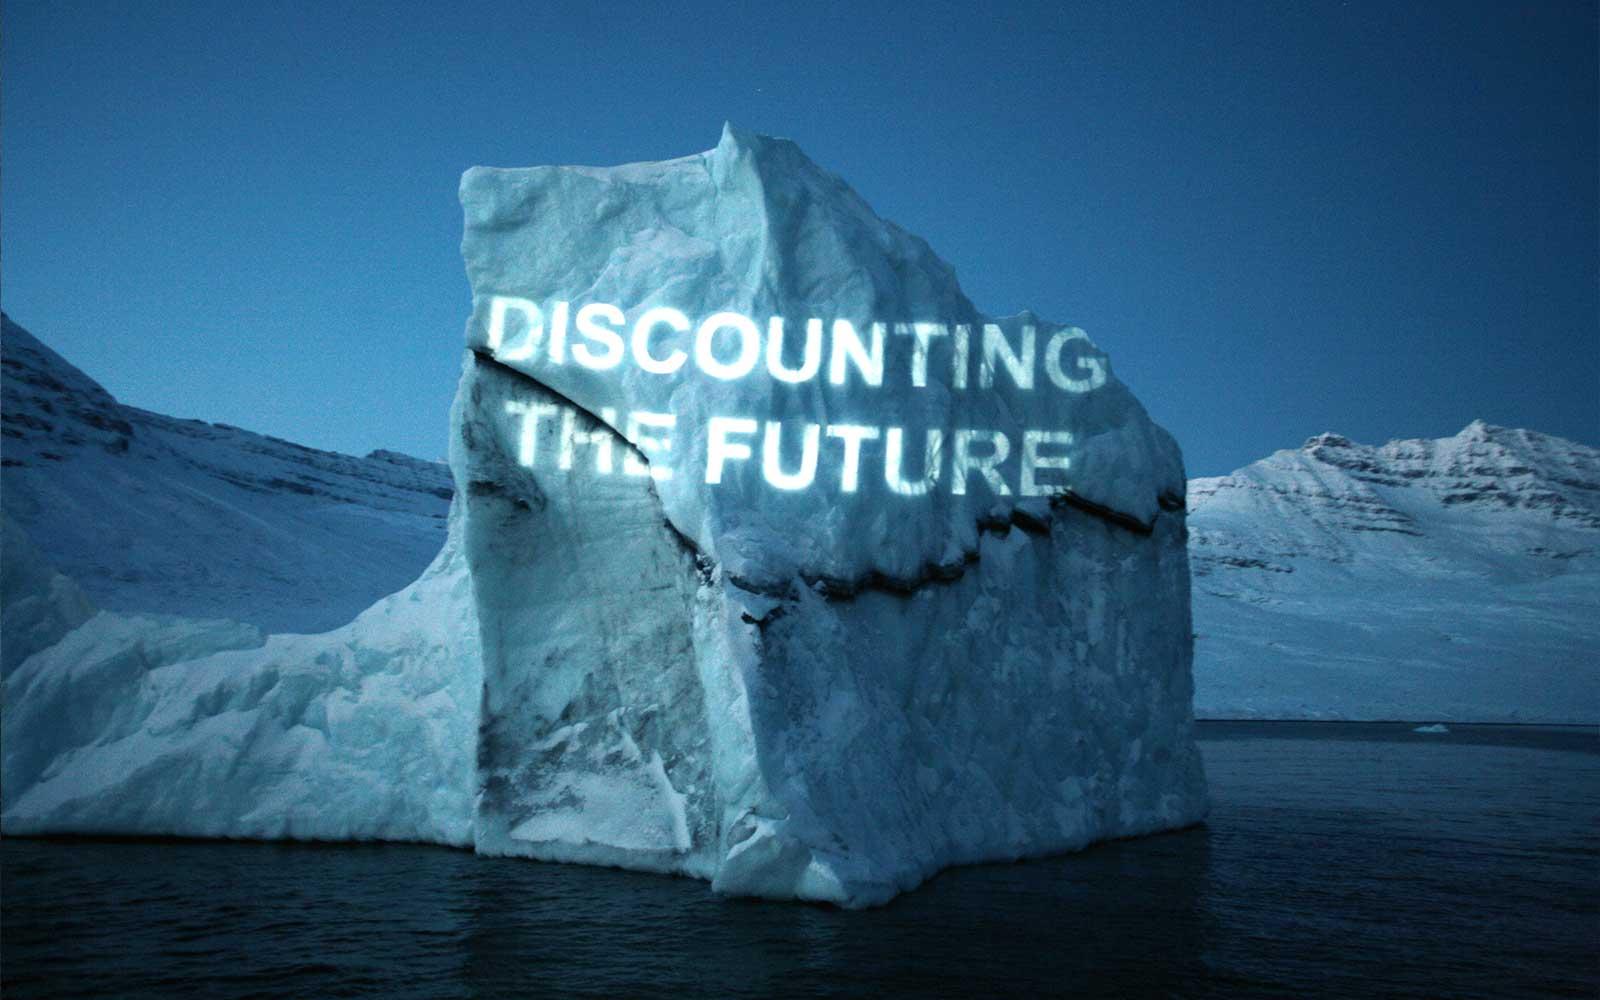 Discounting the Future, Ice Text projection, David Buckland.